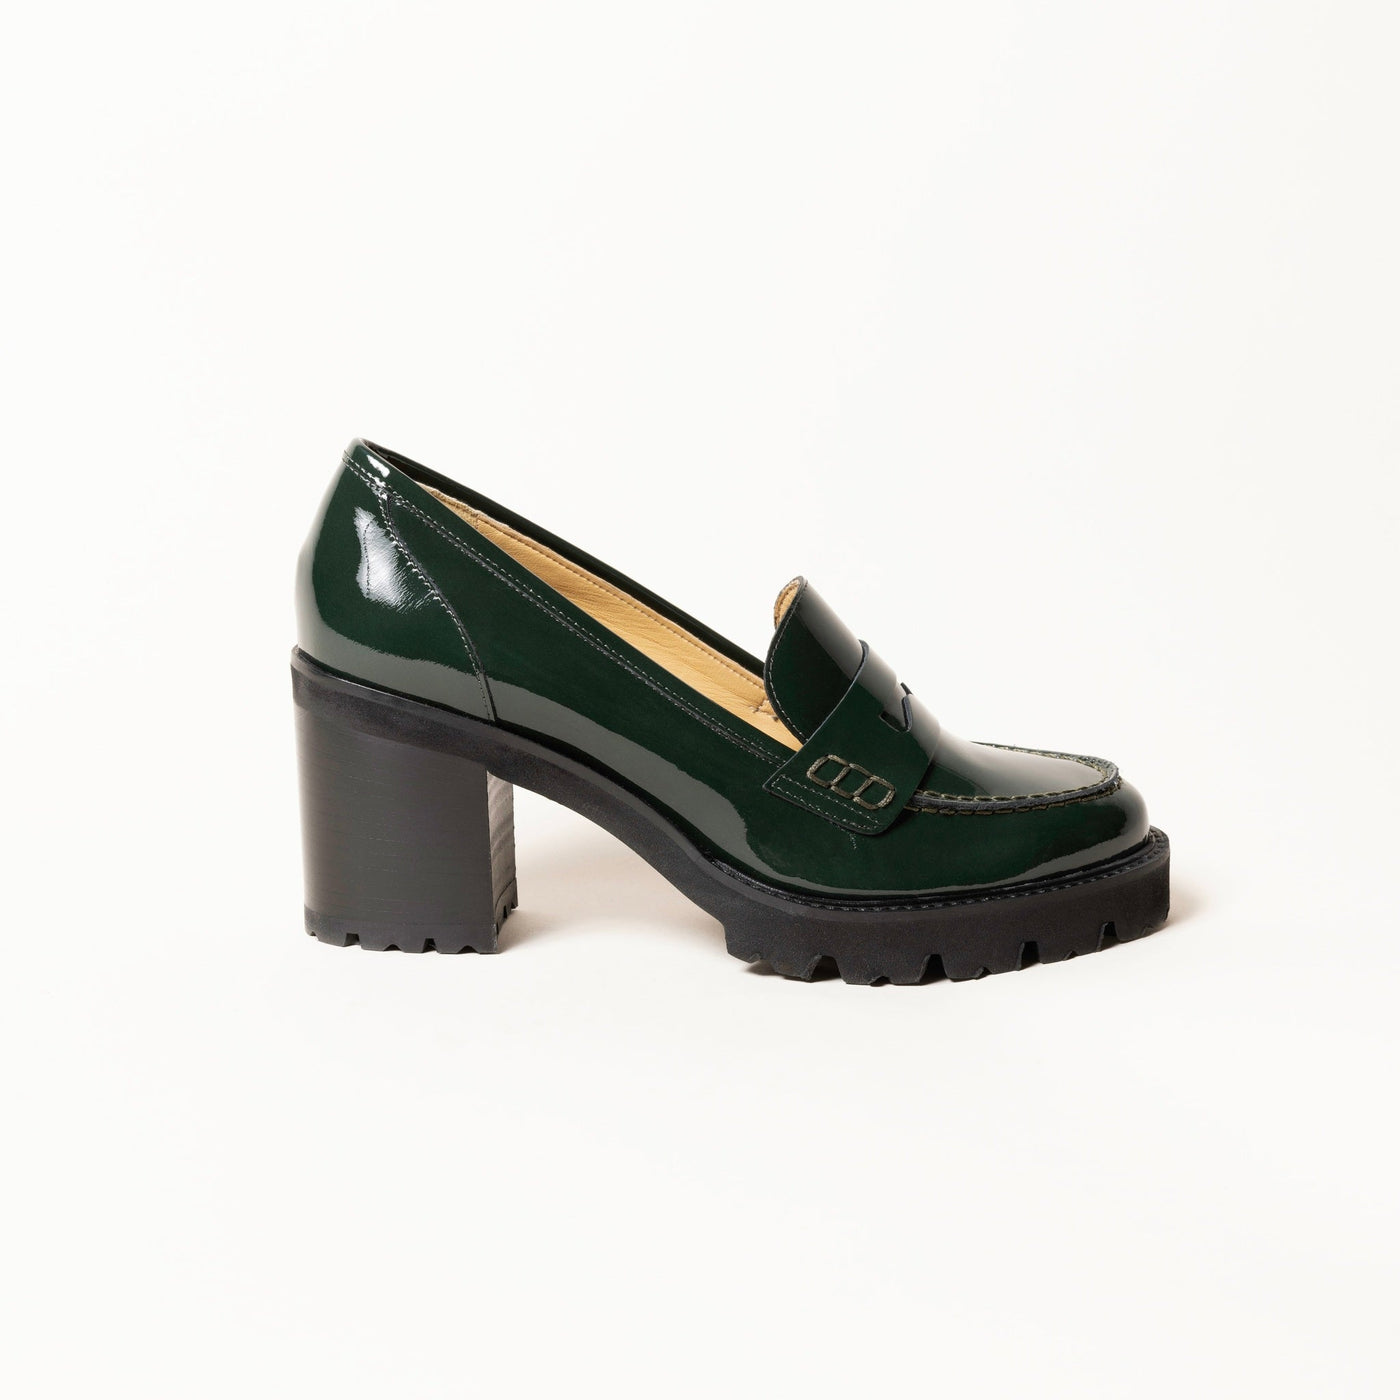 Loafer pumps in green patent leather